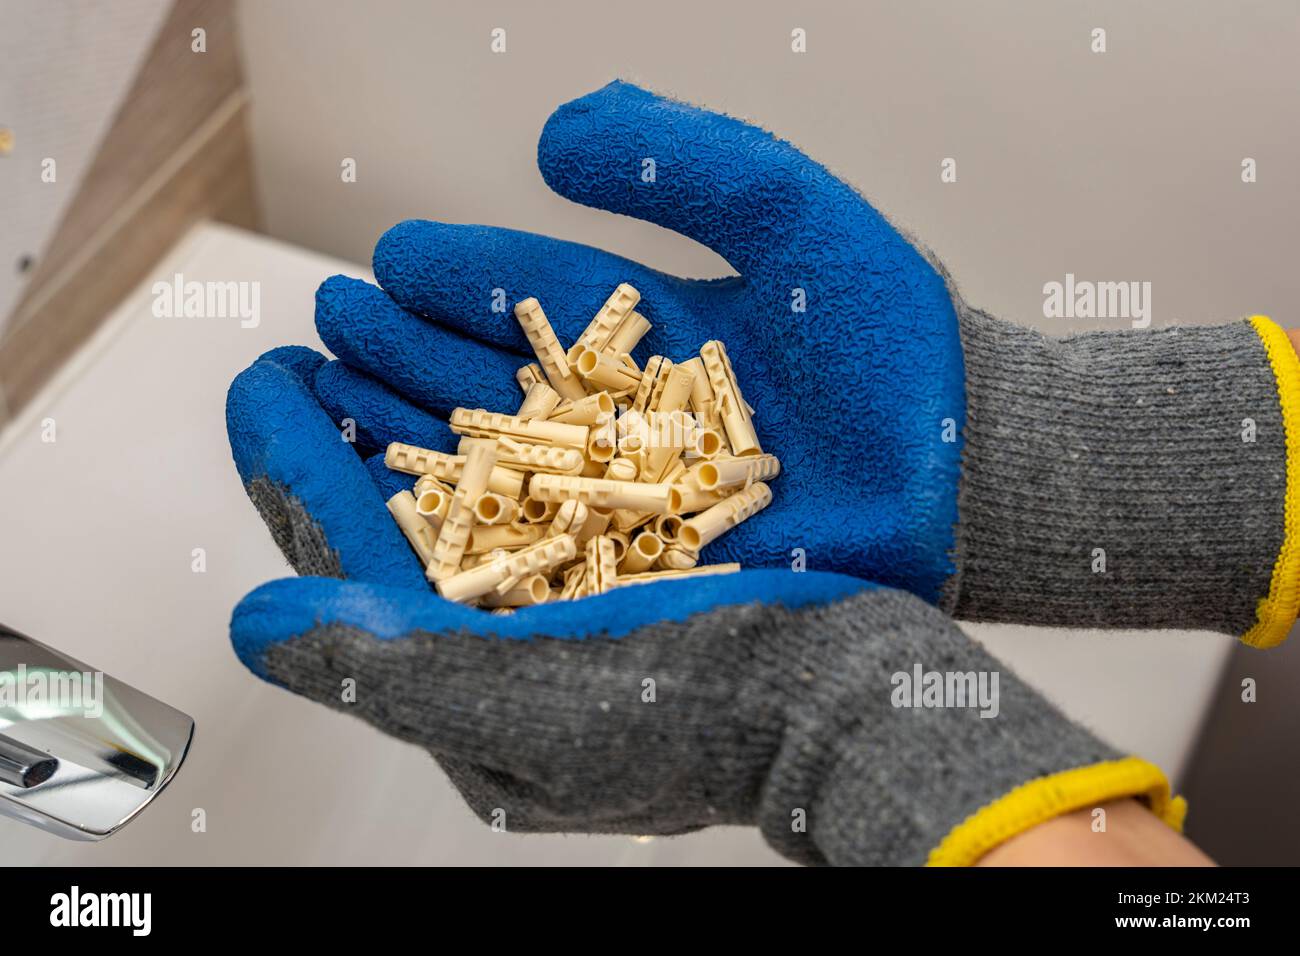 hands of a worker hold in their palms a bunch of plastic dowel pins Stock Photo